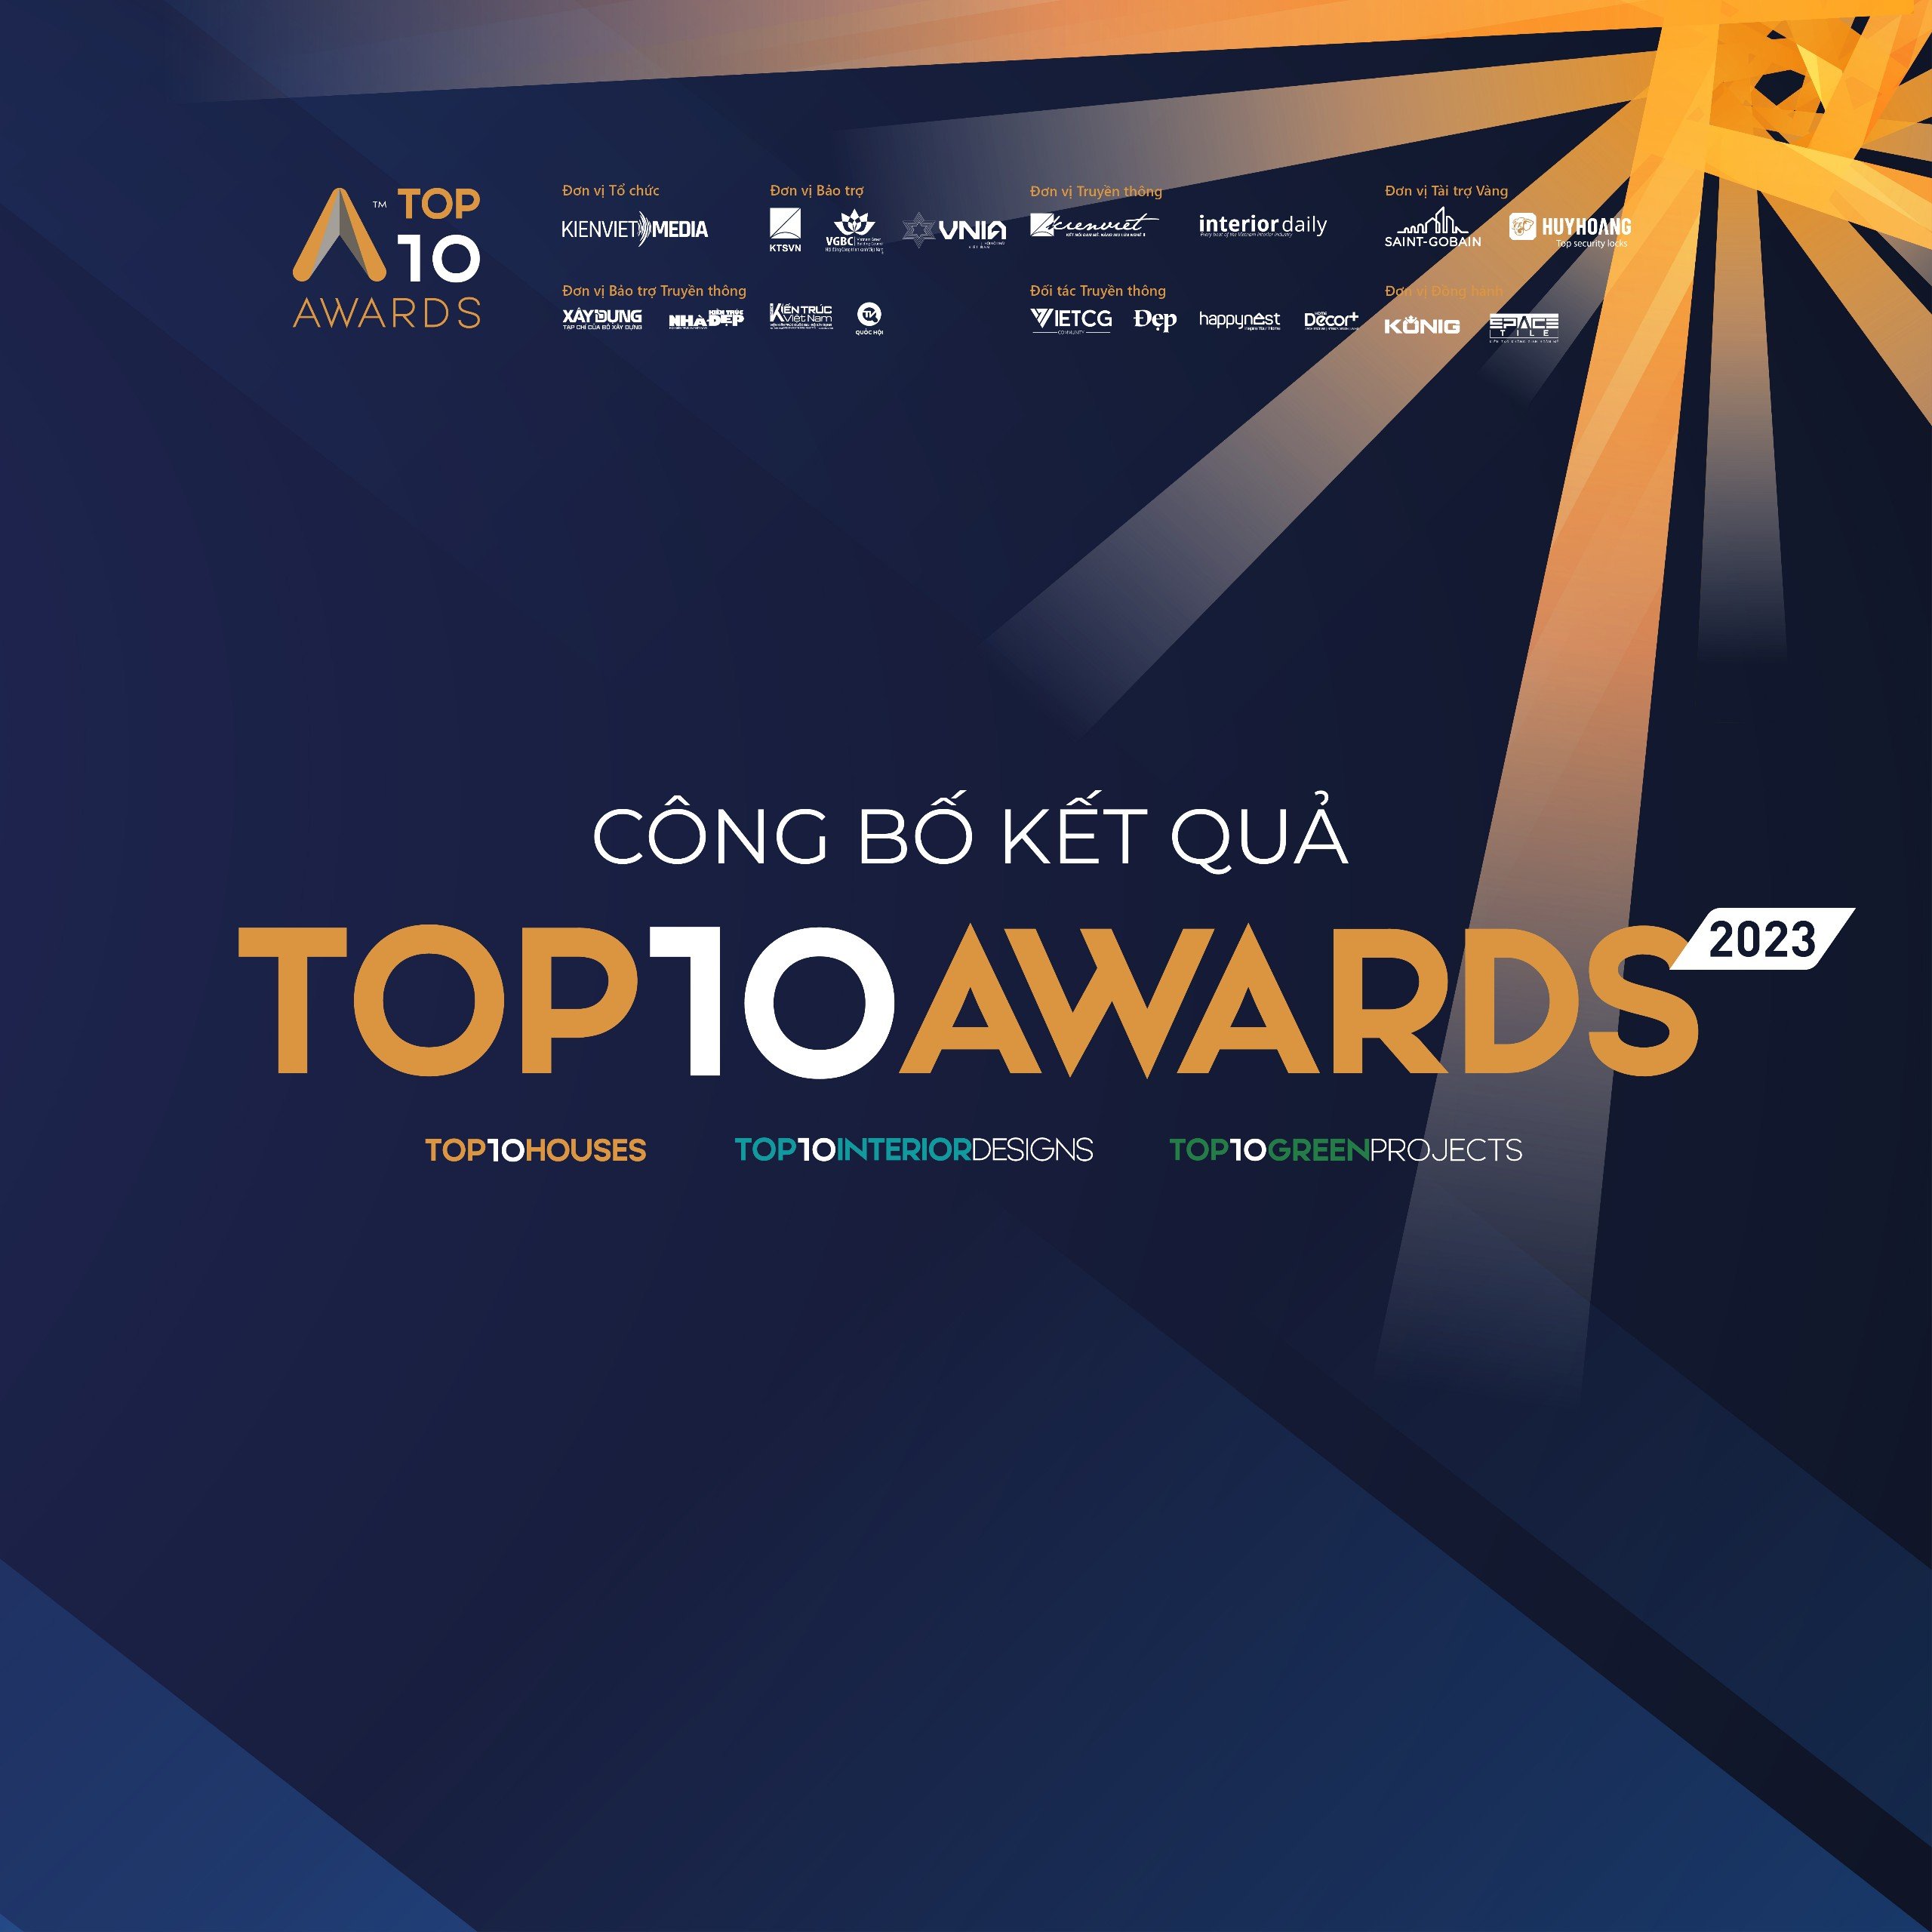 You are currently viewing Công bố kết quả Giải thưởng Top 10 Awards 2023